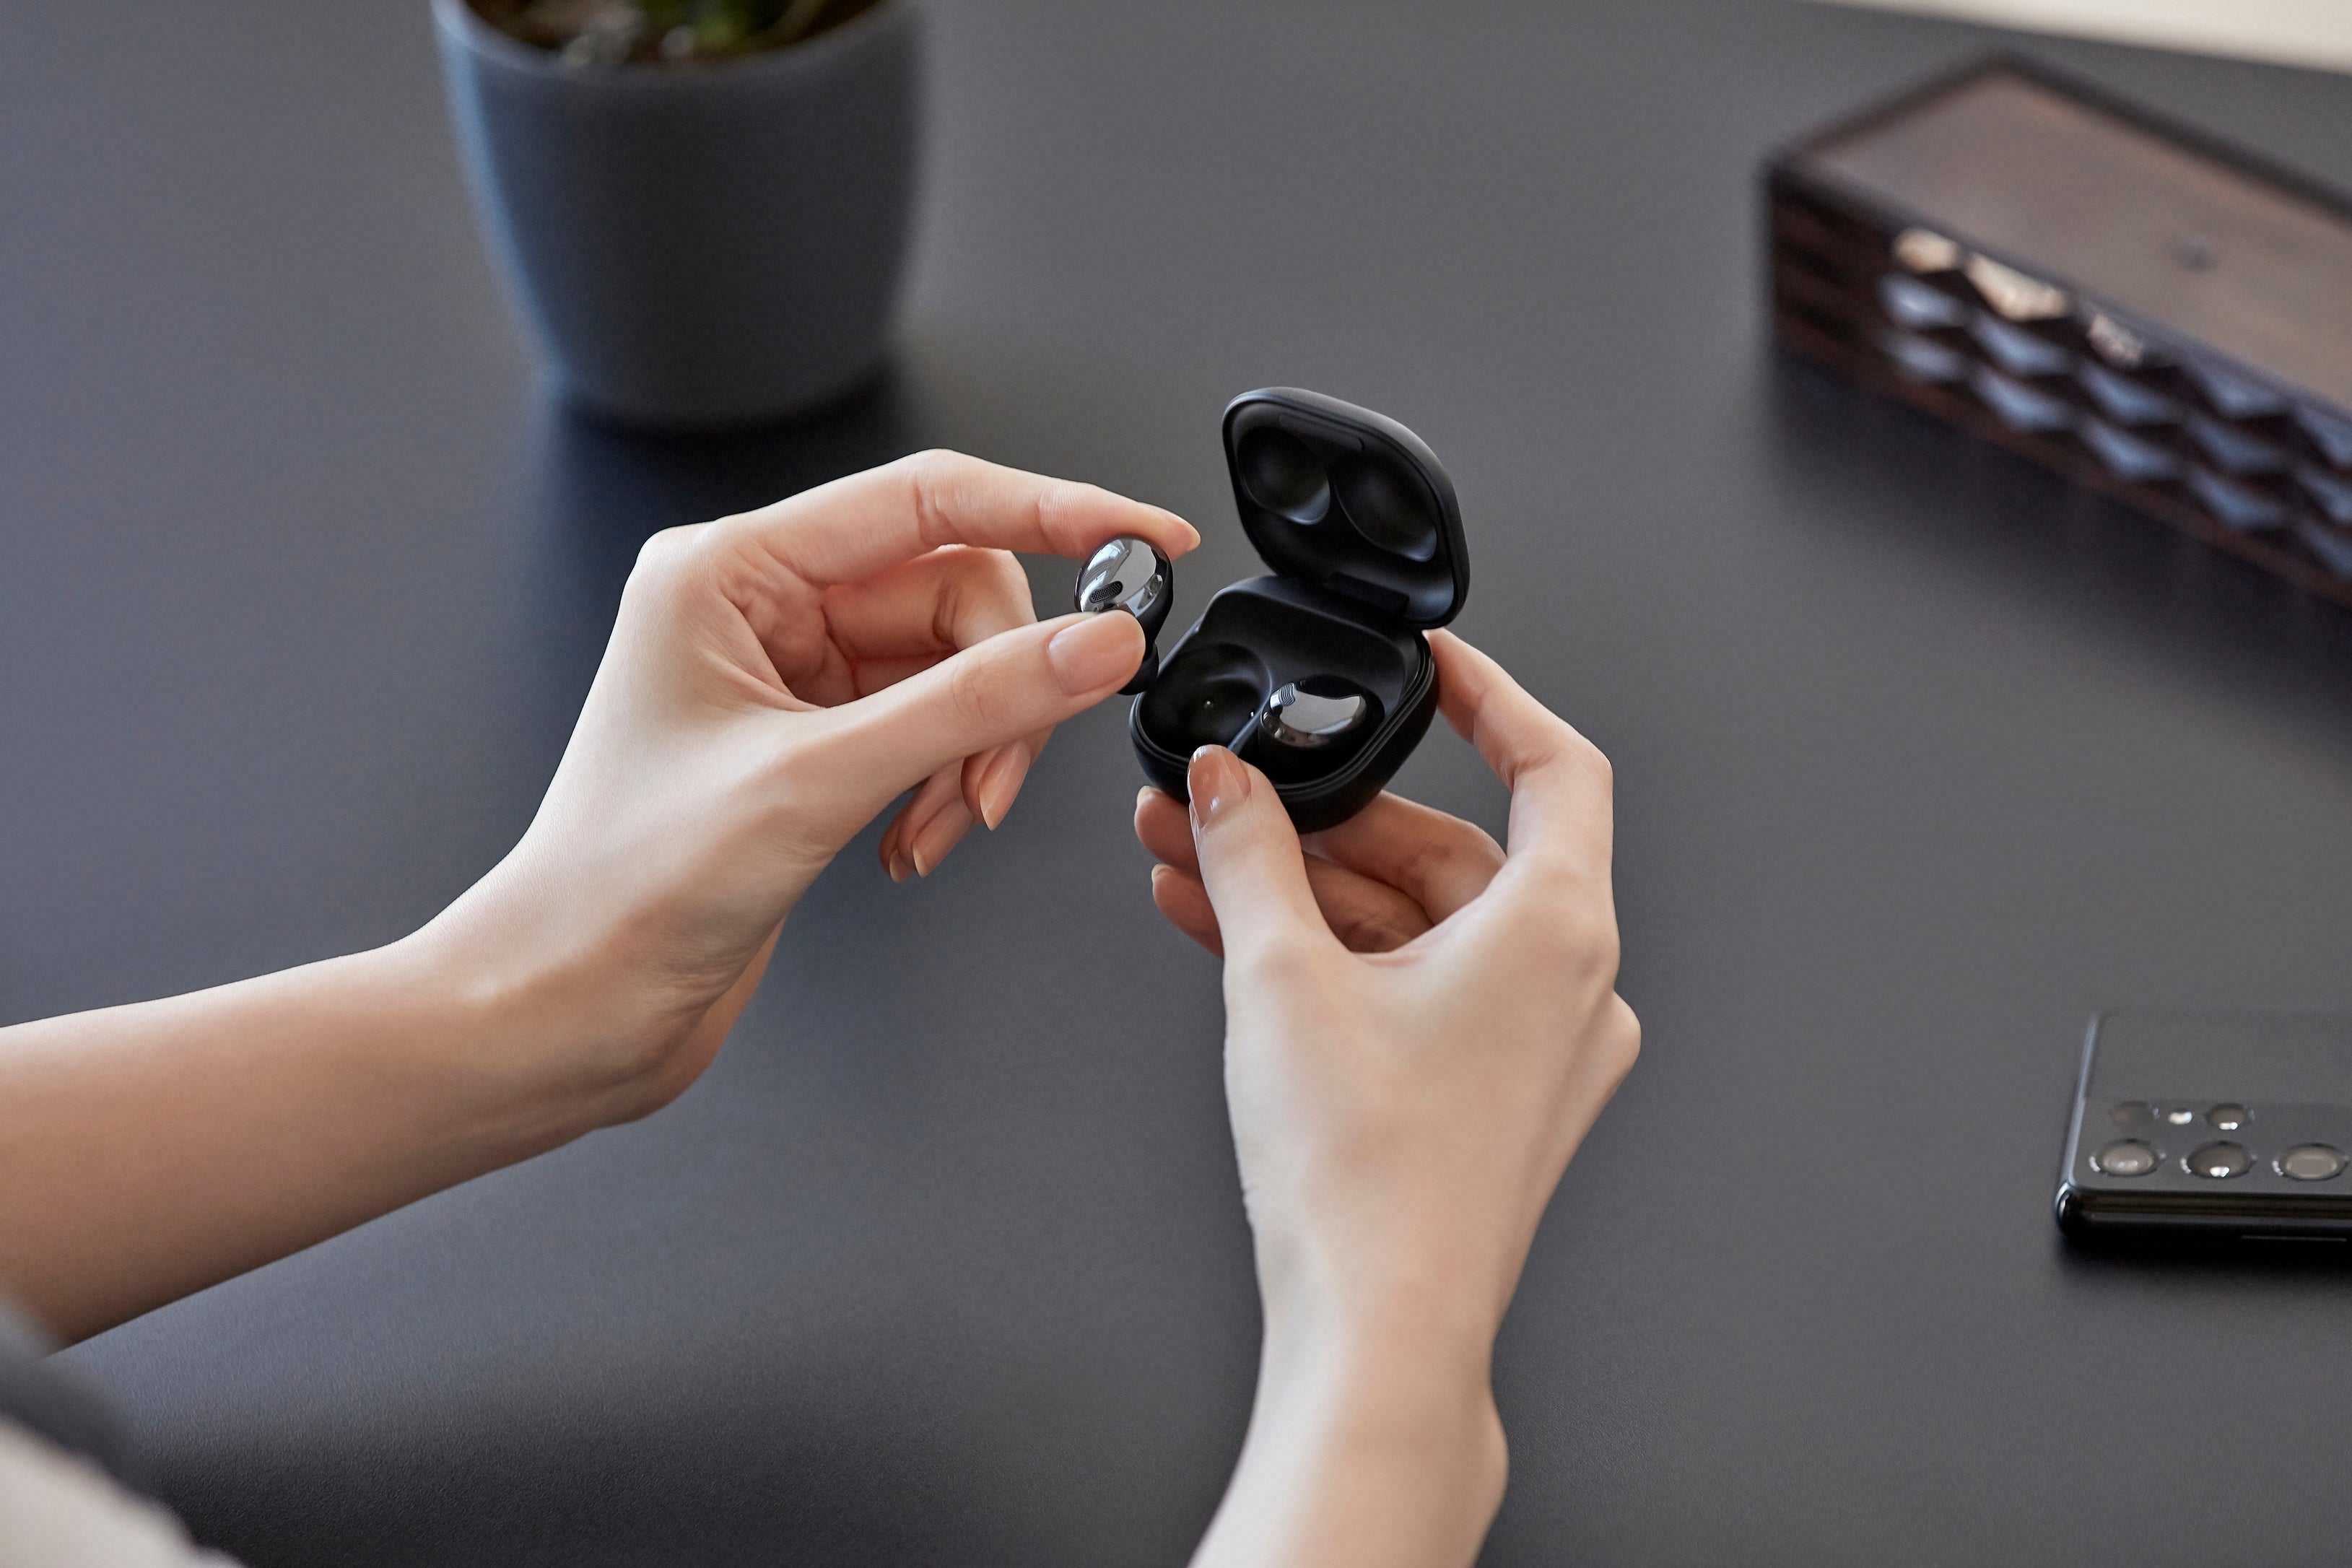 Samsung's Galaxy Buds Pro true wireless earbuds are now official